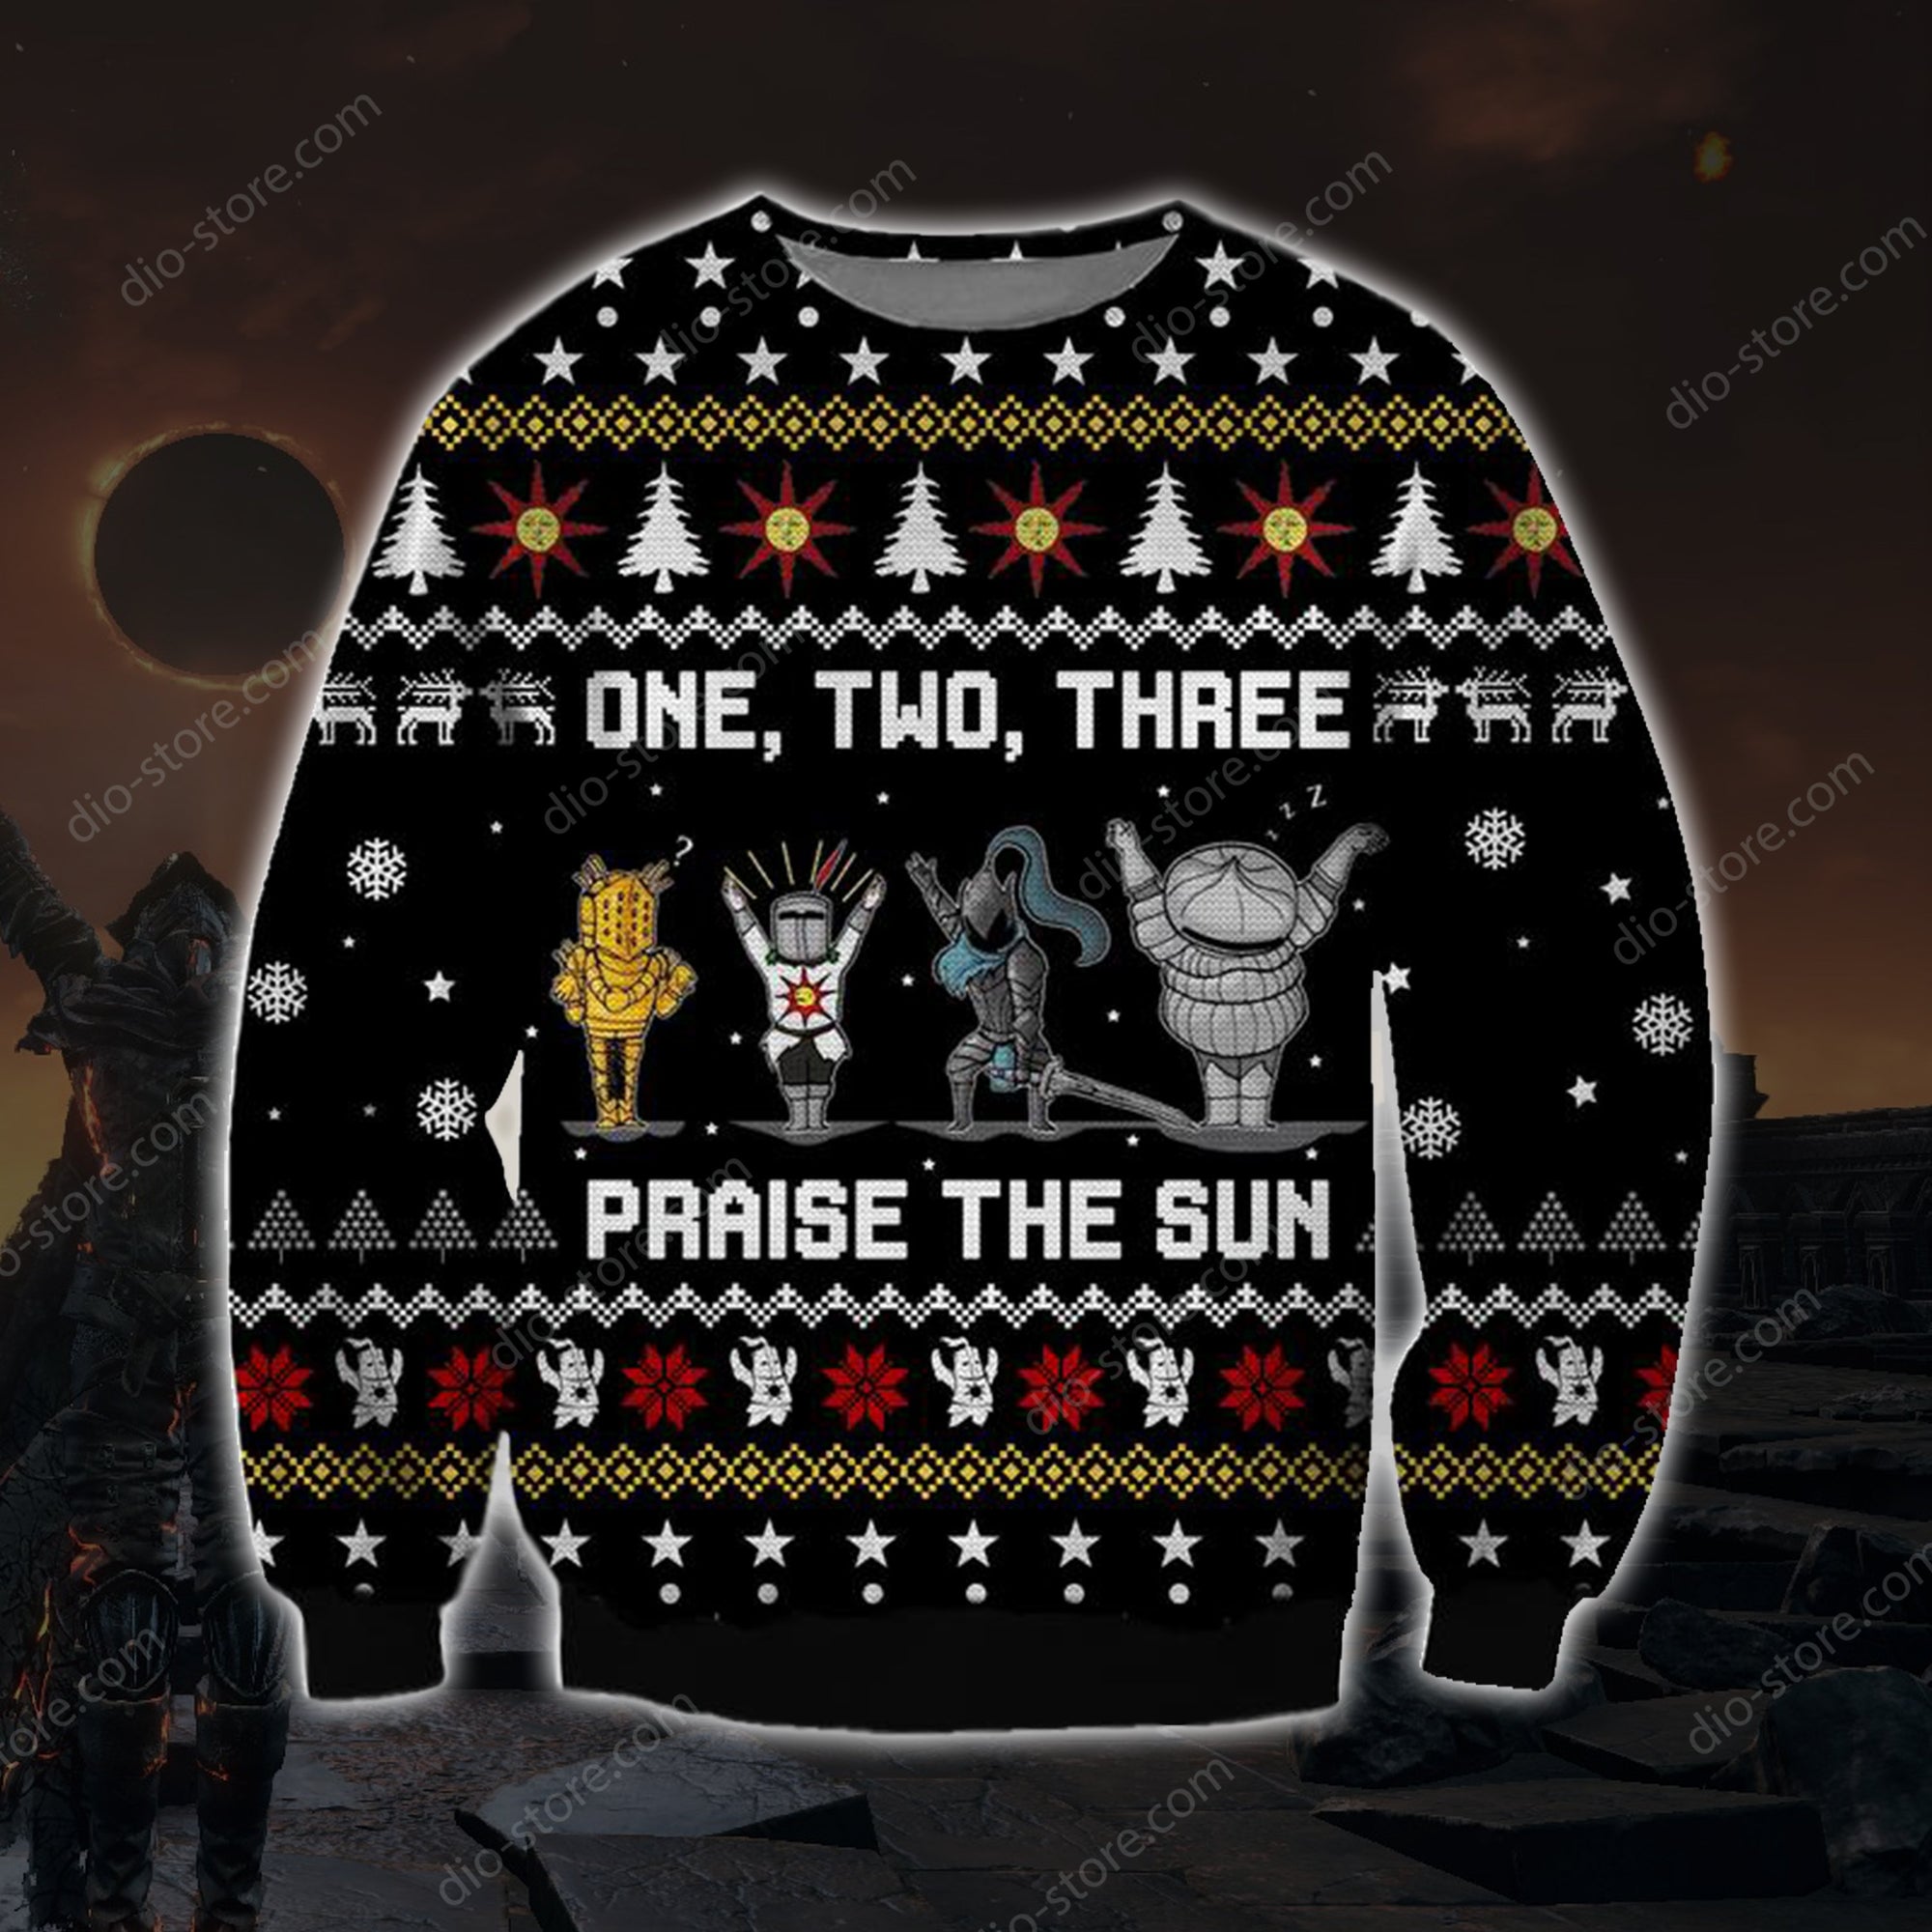 Praise The Sun Knitting Pattern 3D Print Ugly Christmas Sweater Hoodie All Over Printed Cint10587